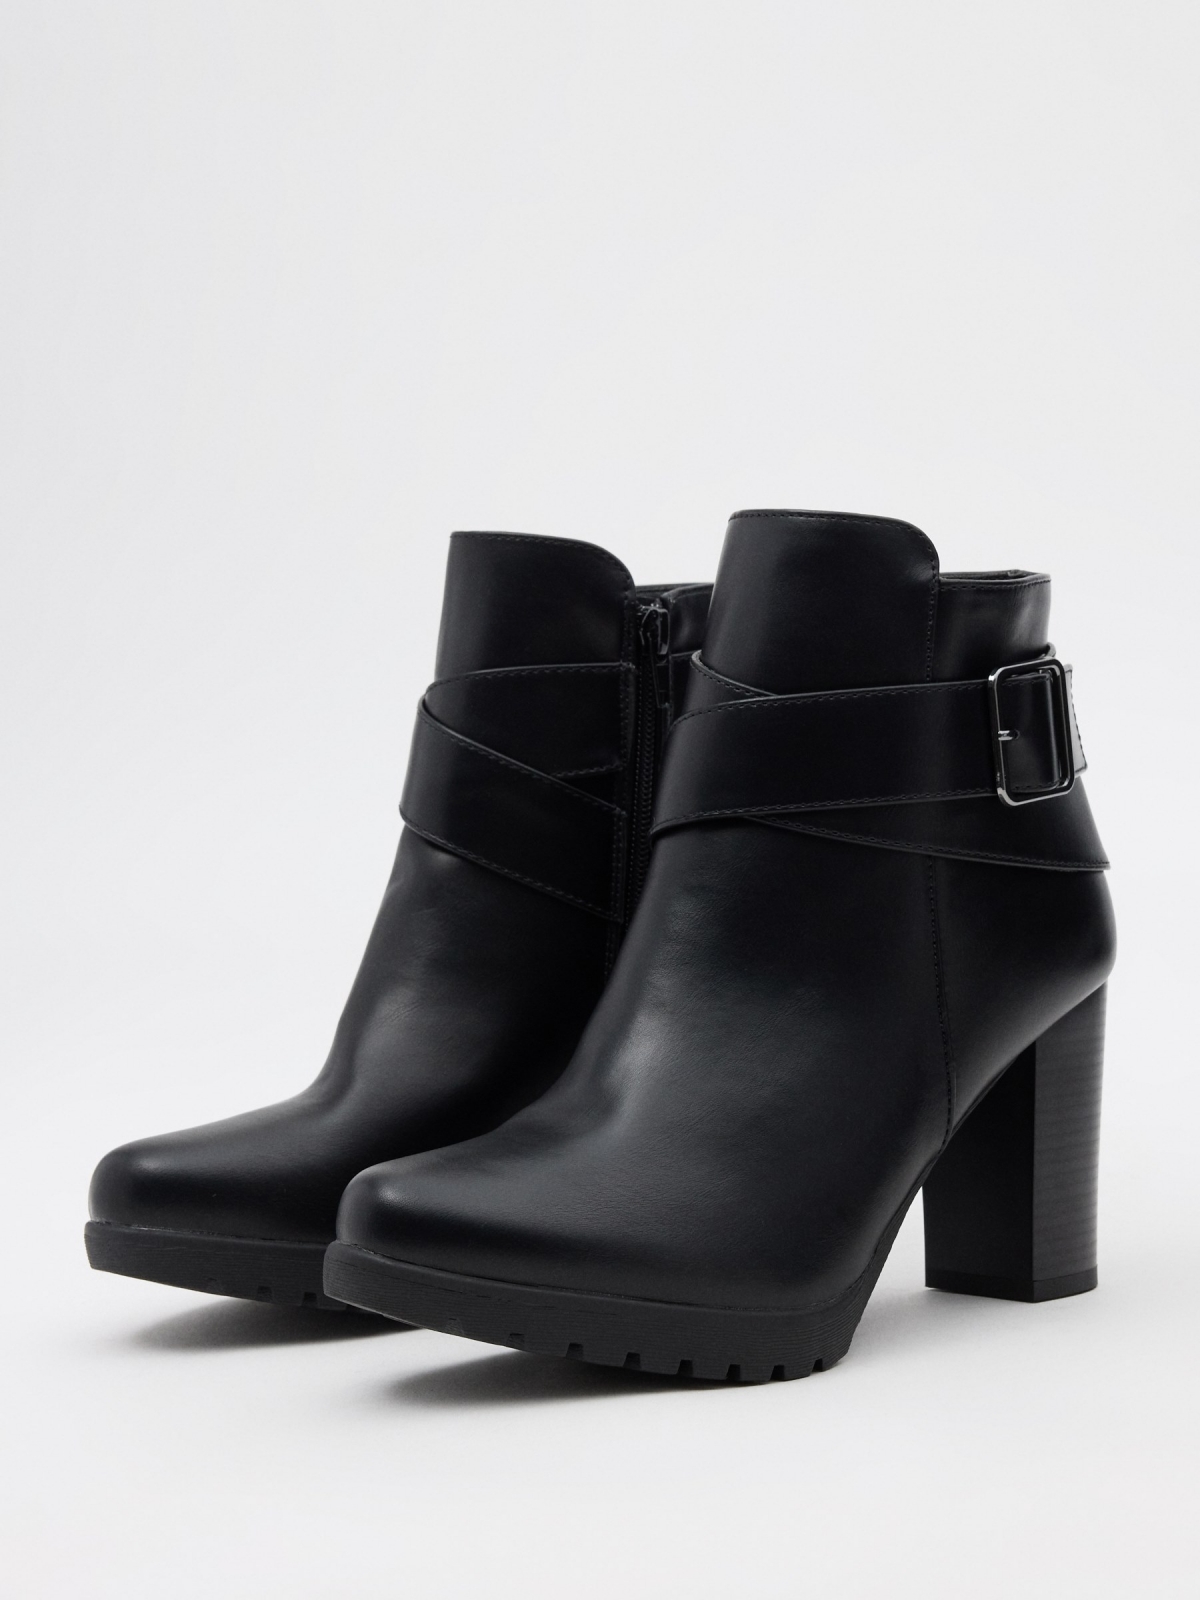 Ankle boots buckle cross straps black 45º front view